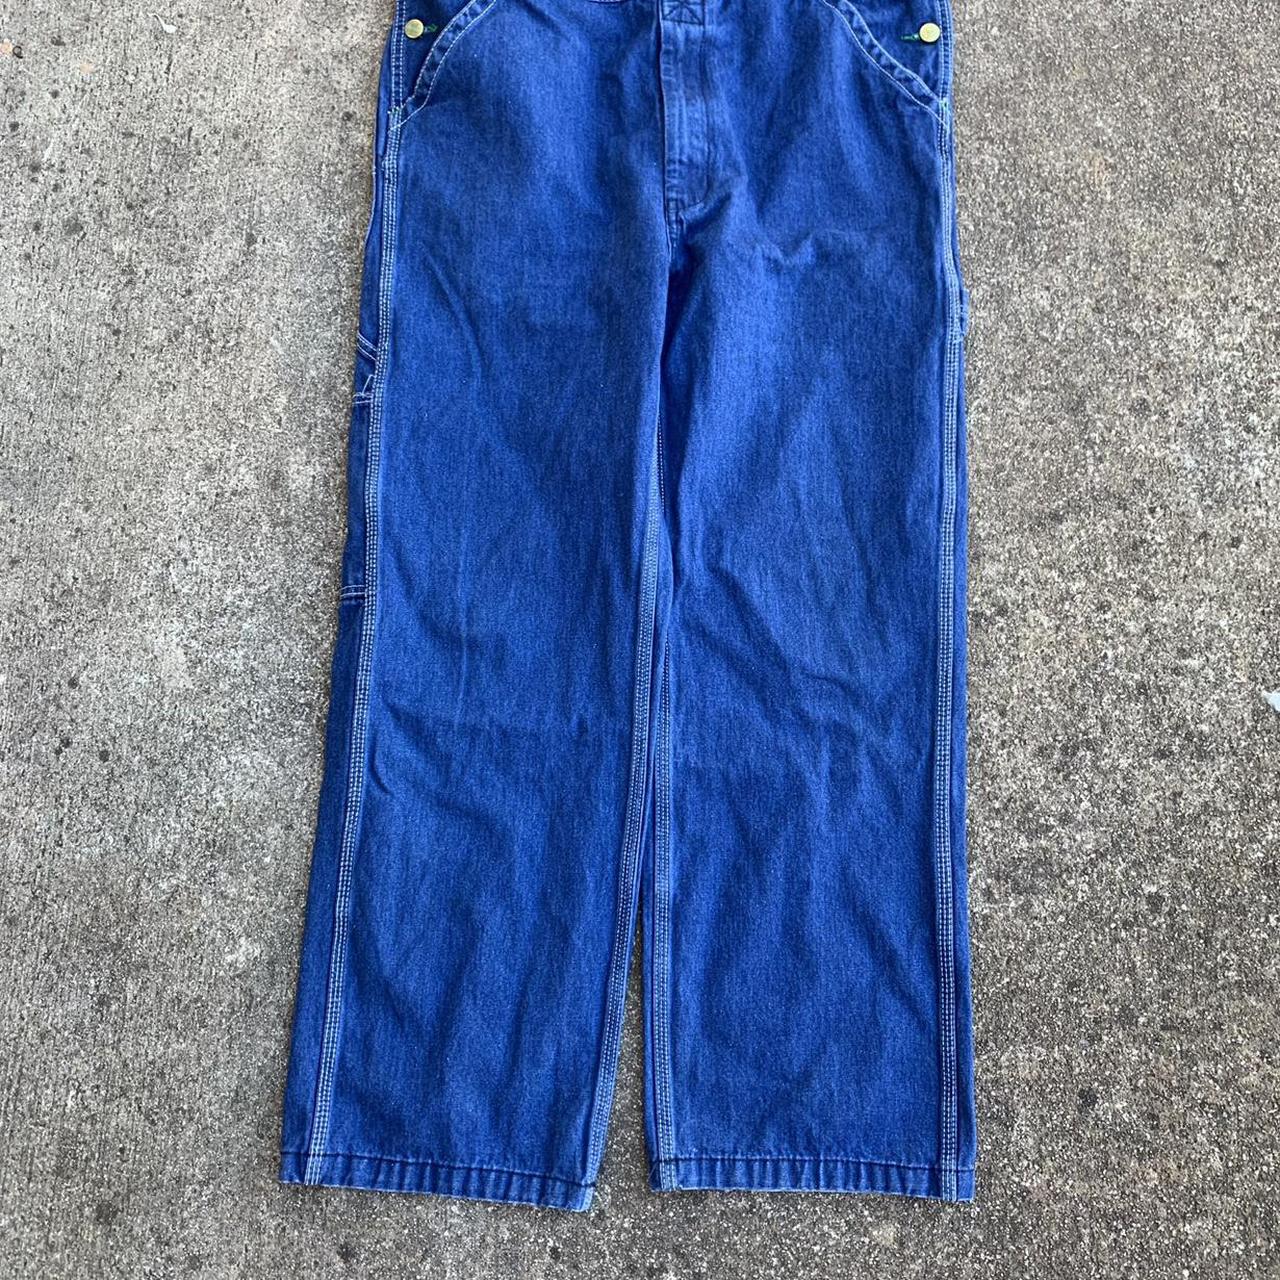 American Vintage Men's Blue Dungarees-overalls (4)